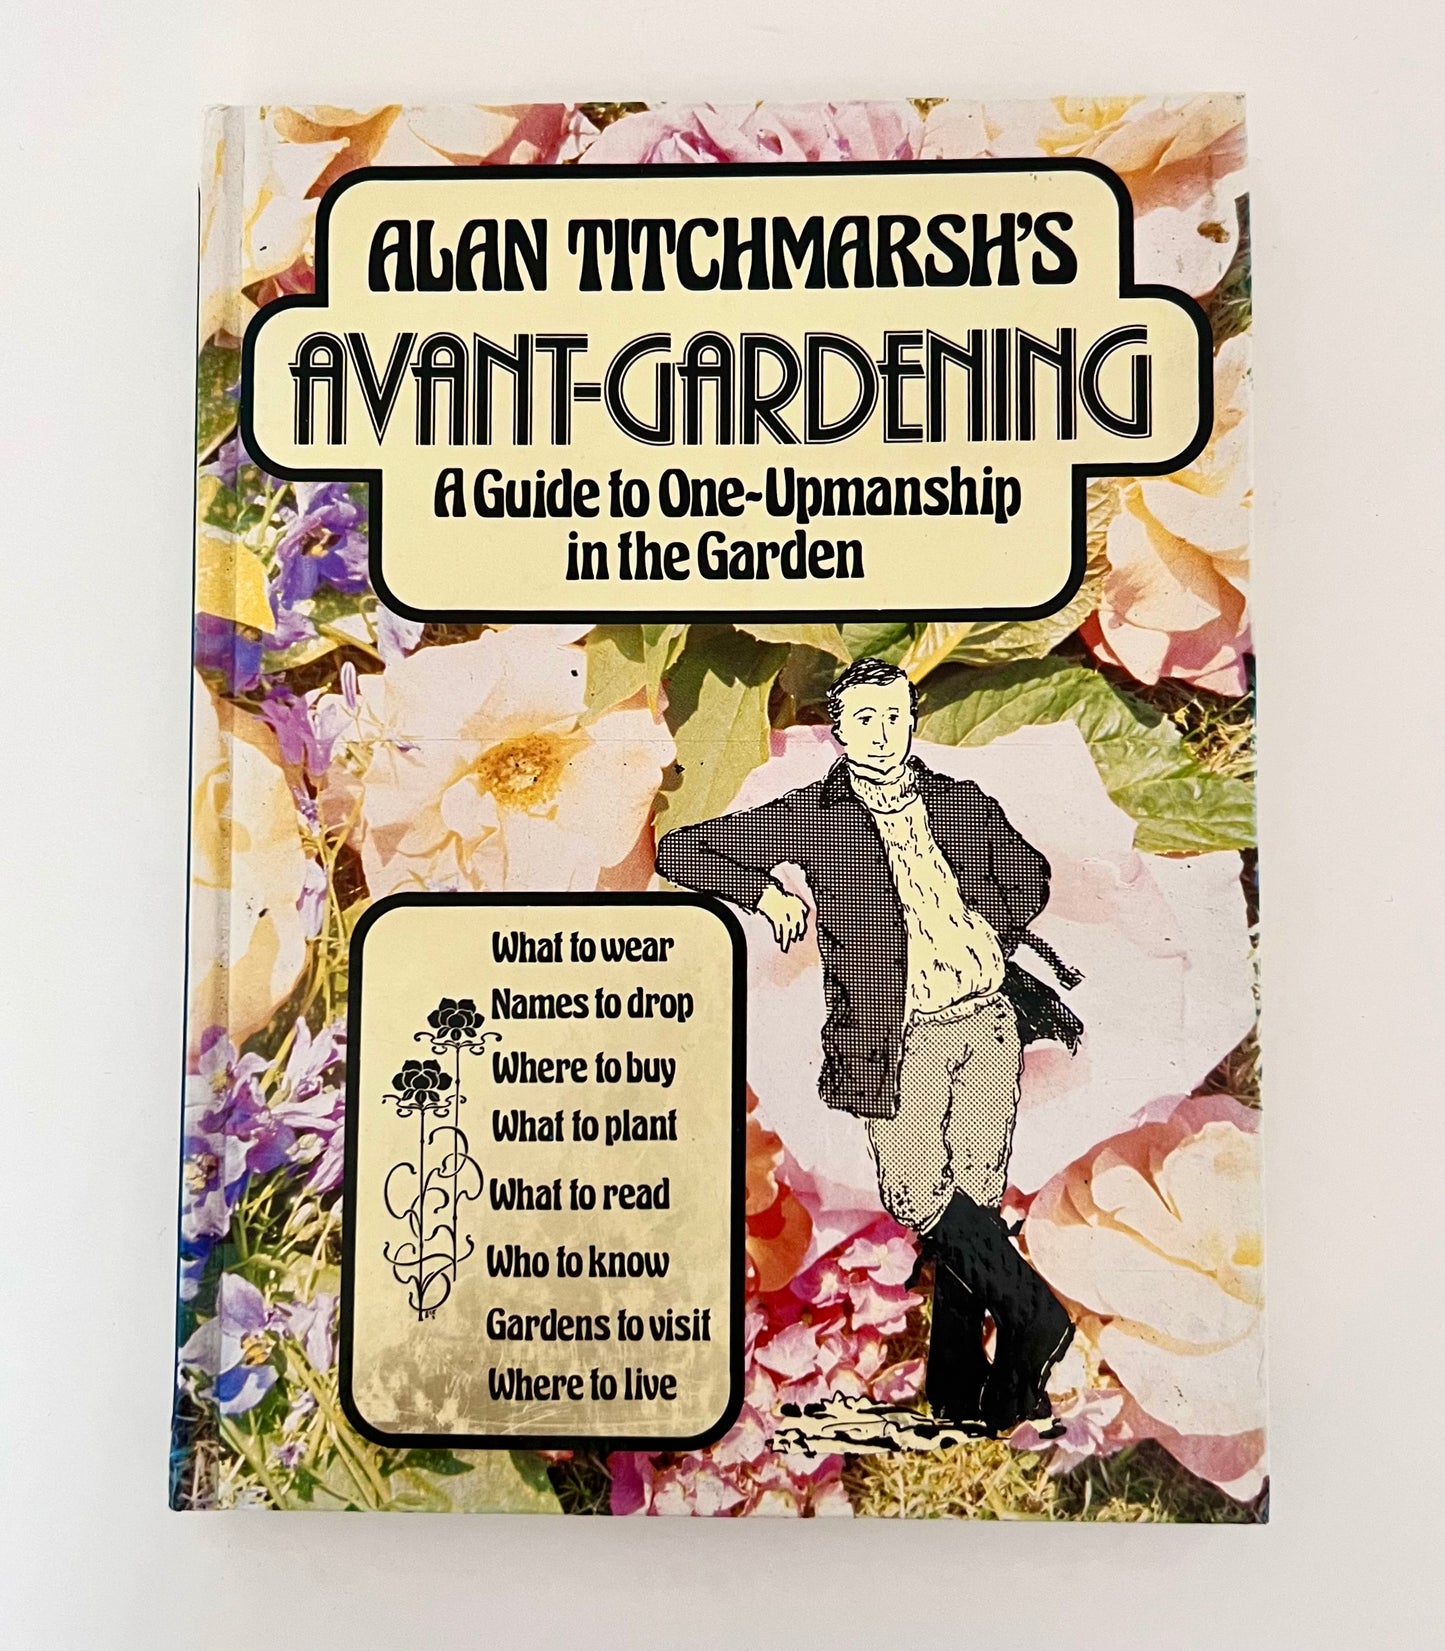 Avant-Gardening, A Guide to One-Upmanship in the Garden by Alan Titchmarsh, 1984